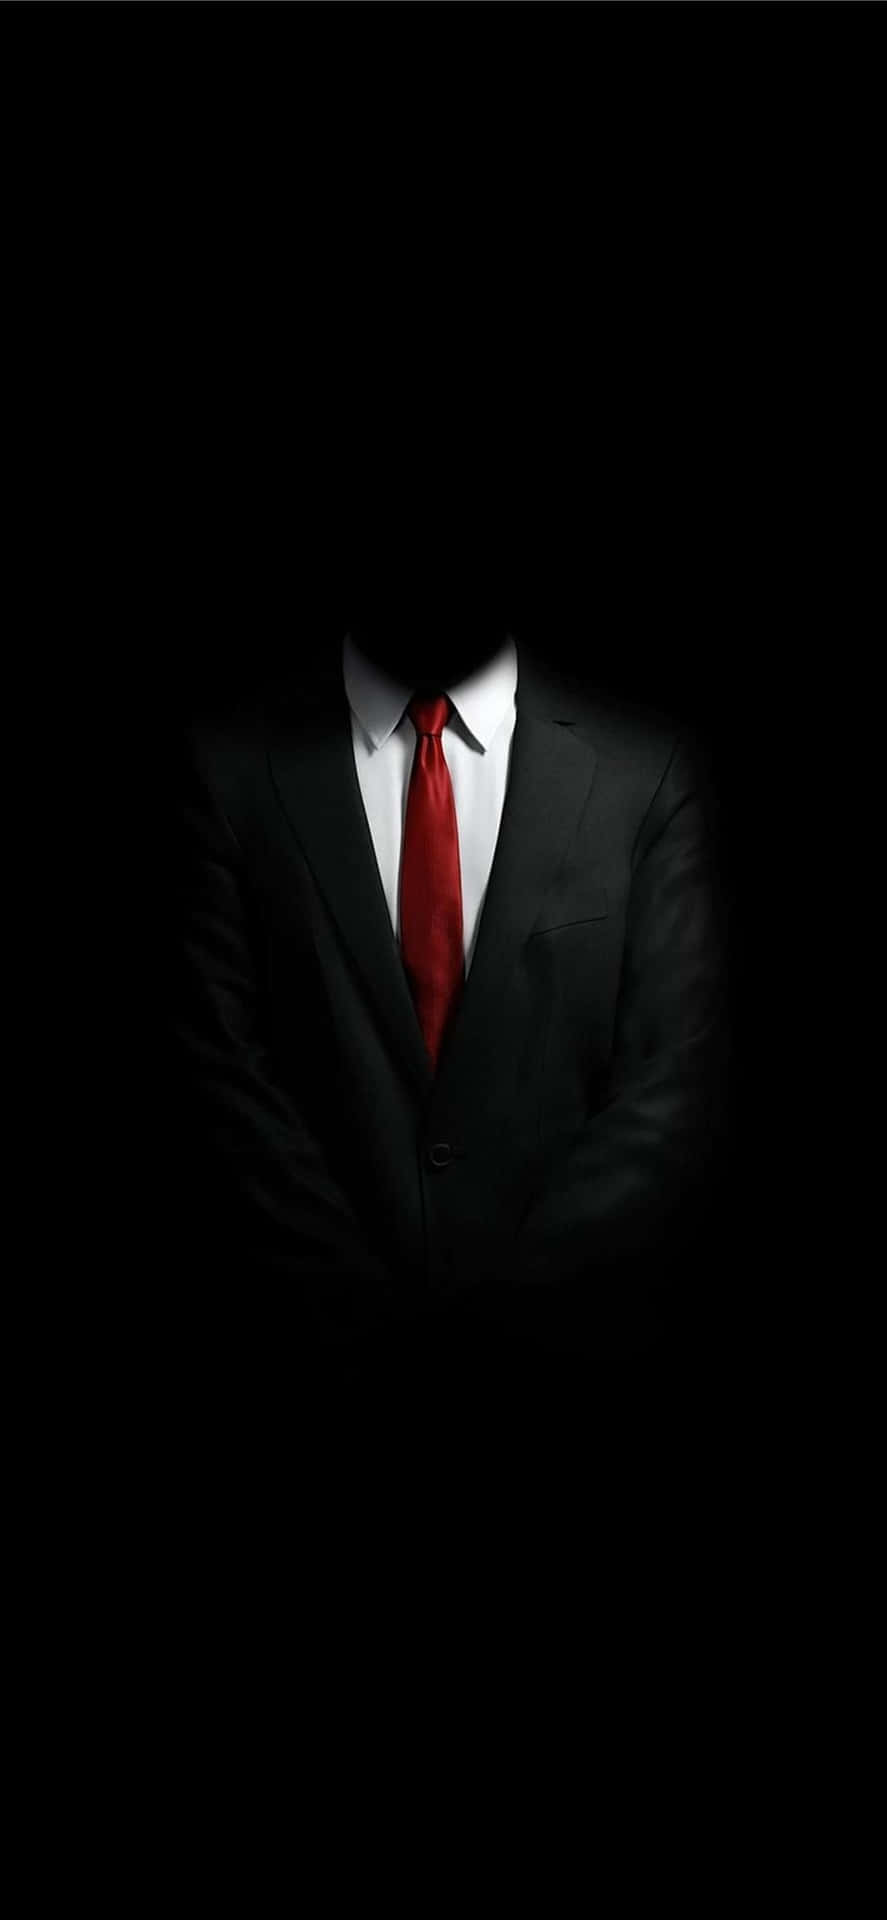 Mysterious Manin Suitand Red Tie Wallpaper